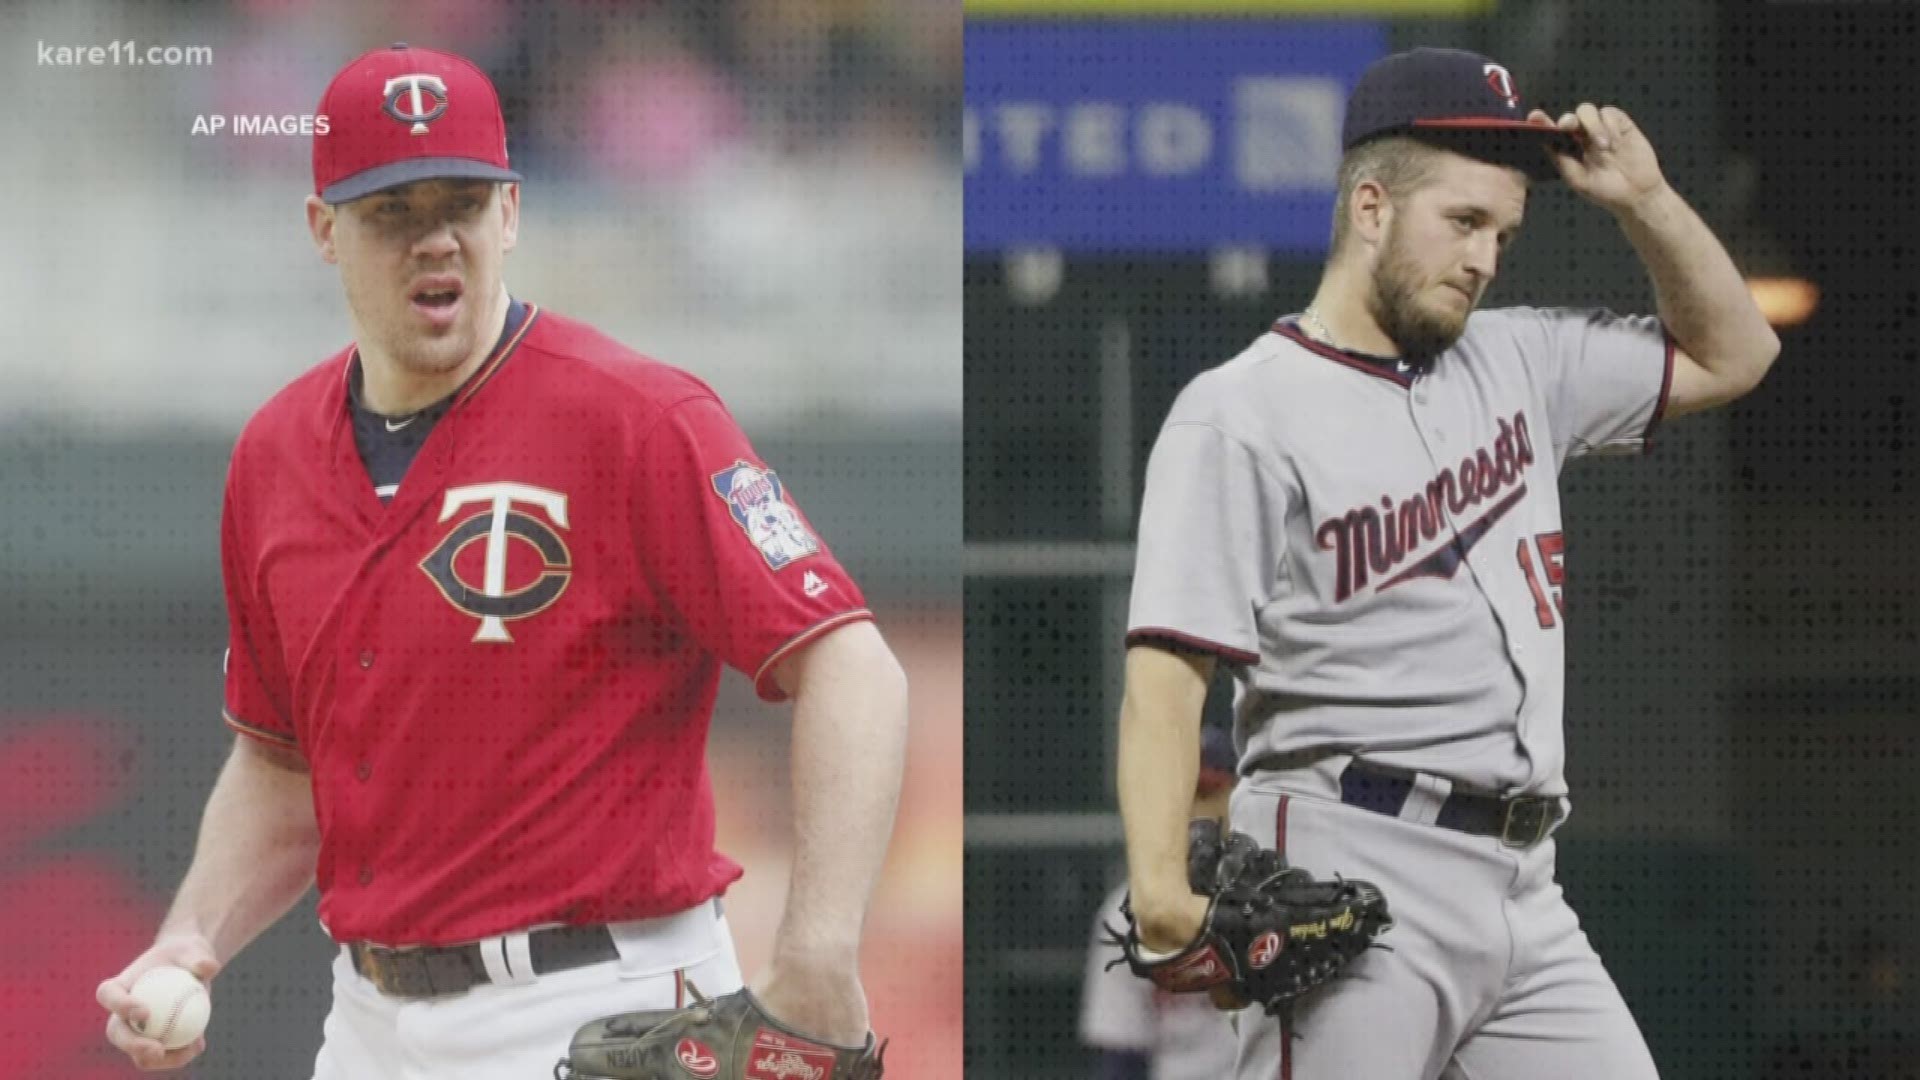 Last night – after another rough game giving up a big homer, Twins pitcher Trevor May quit twitter.